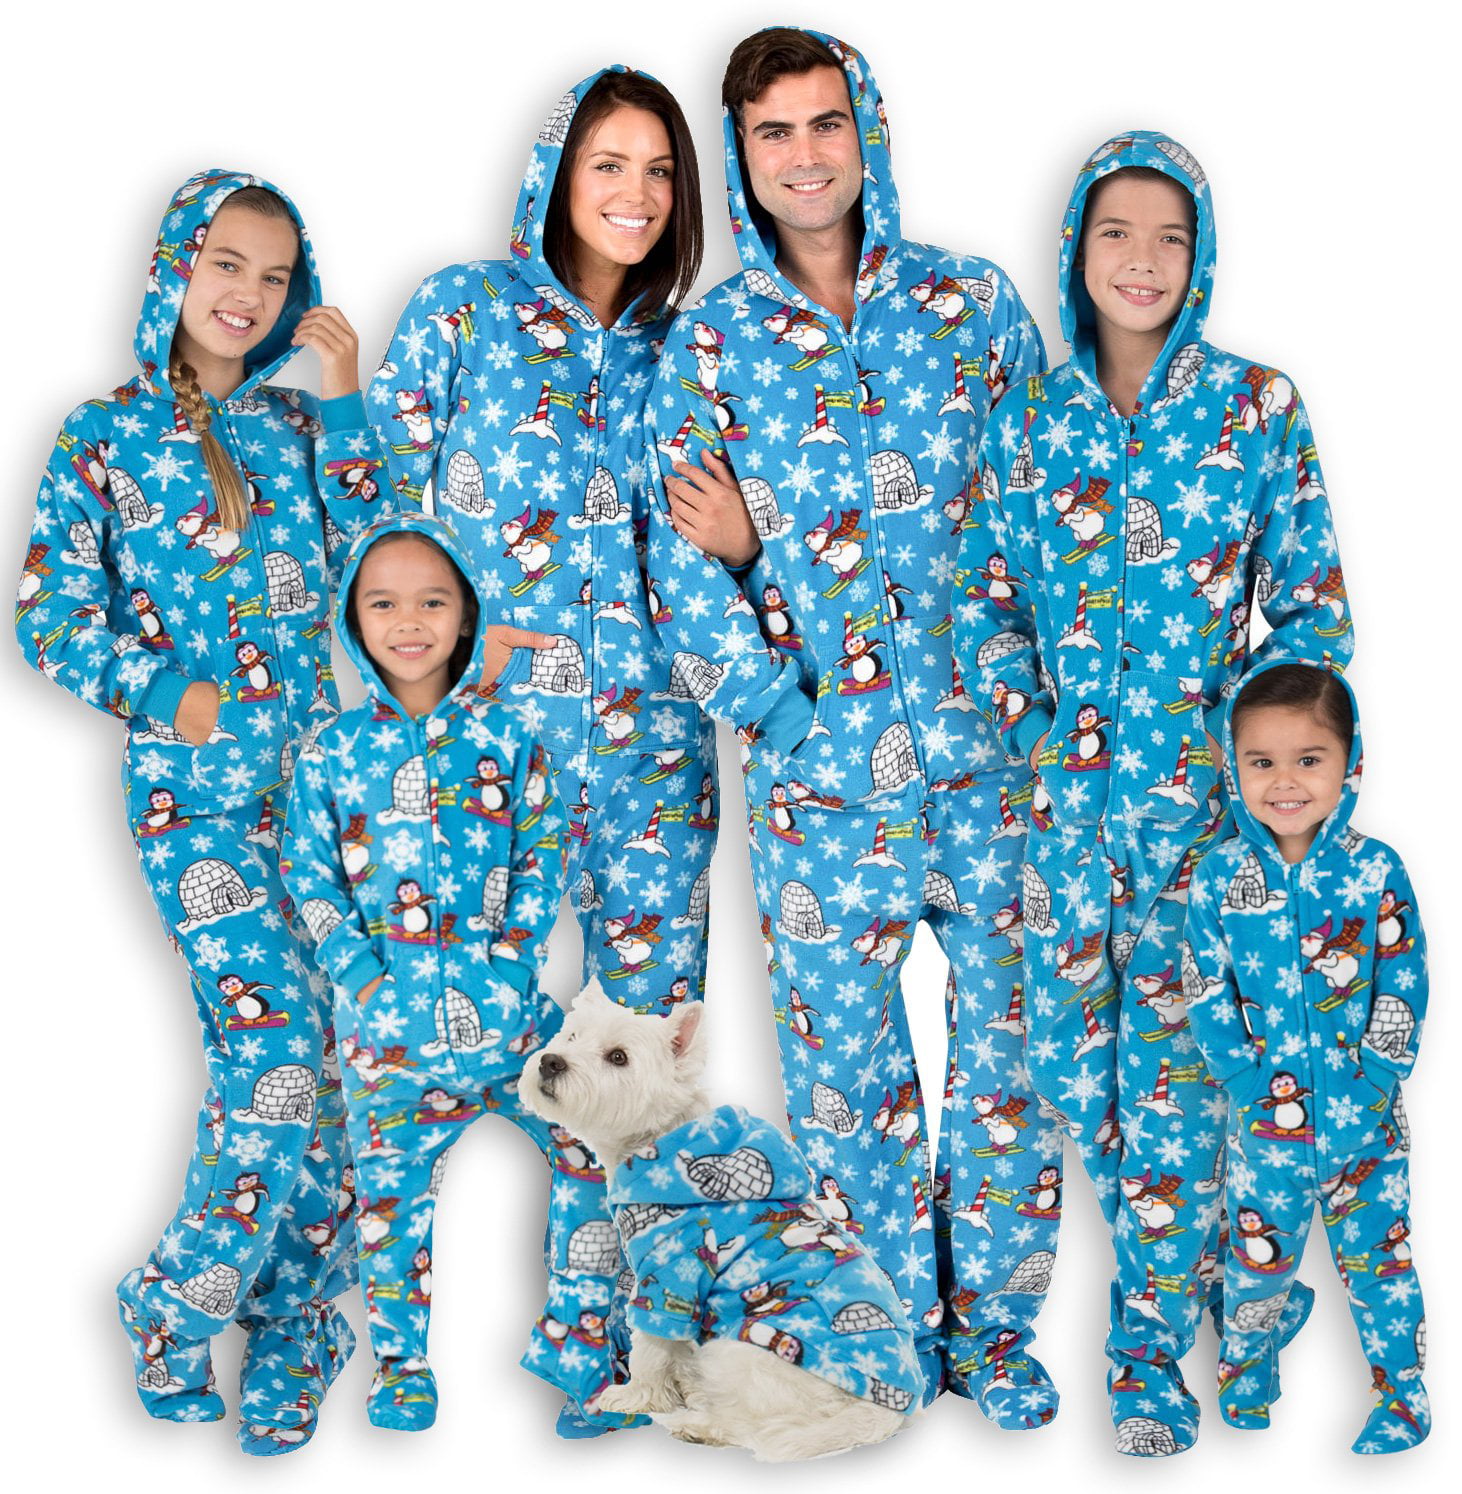 Matching Family Christmas Pajamas Sets Infant Warm Hooded Flannel Cute Print Pattern Sleepwear Onesies for Adult Kids Pet 